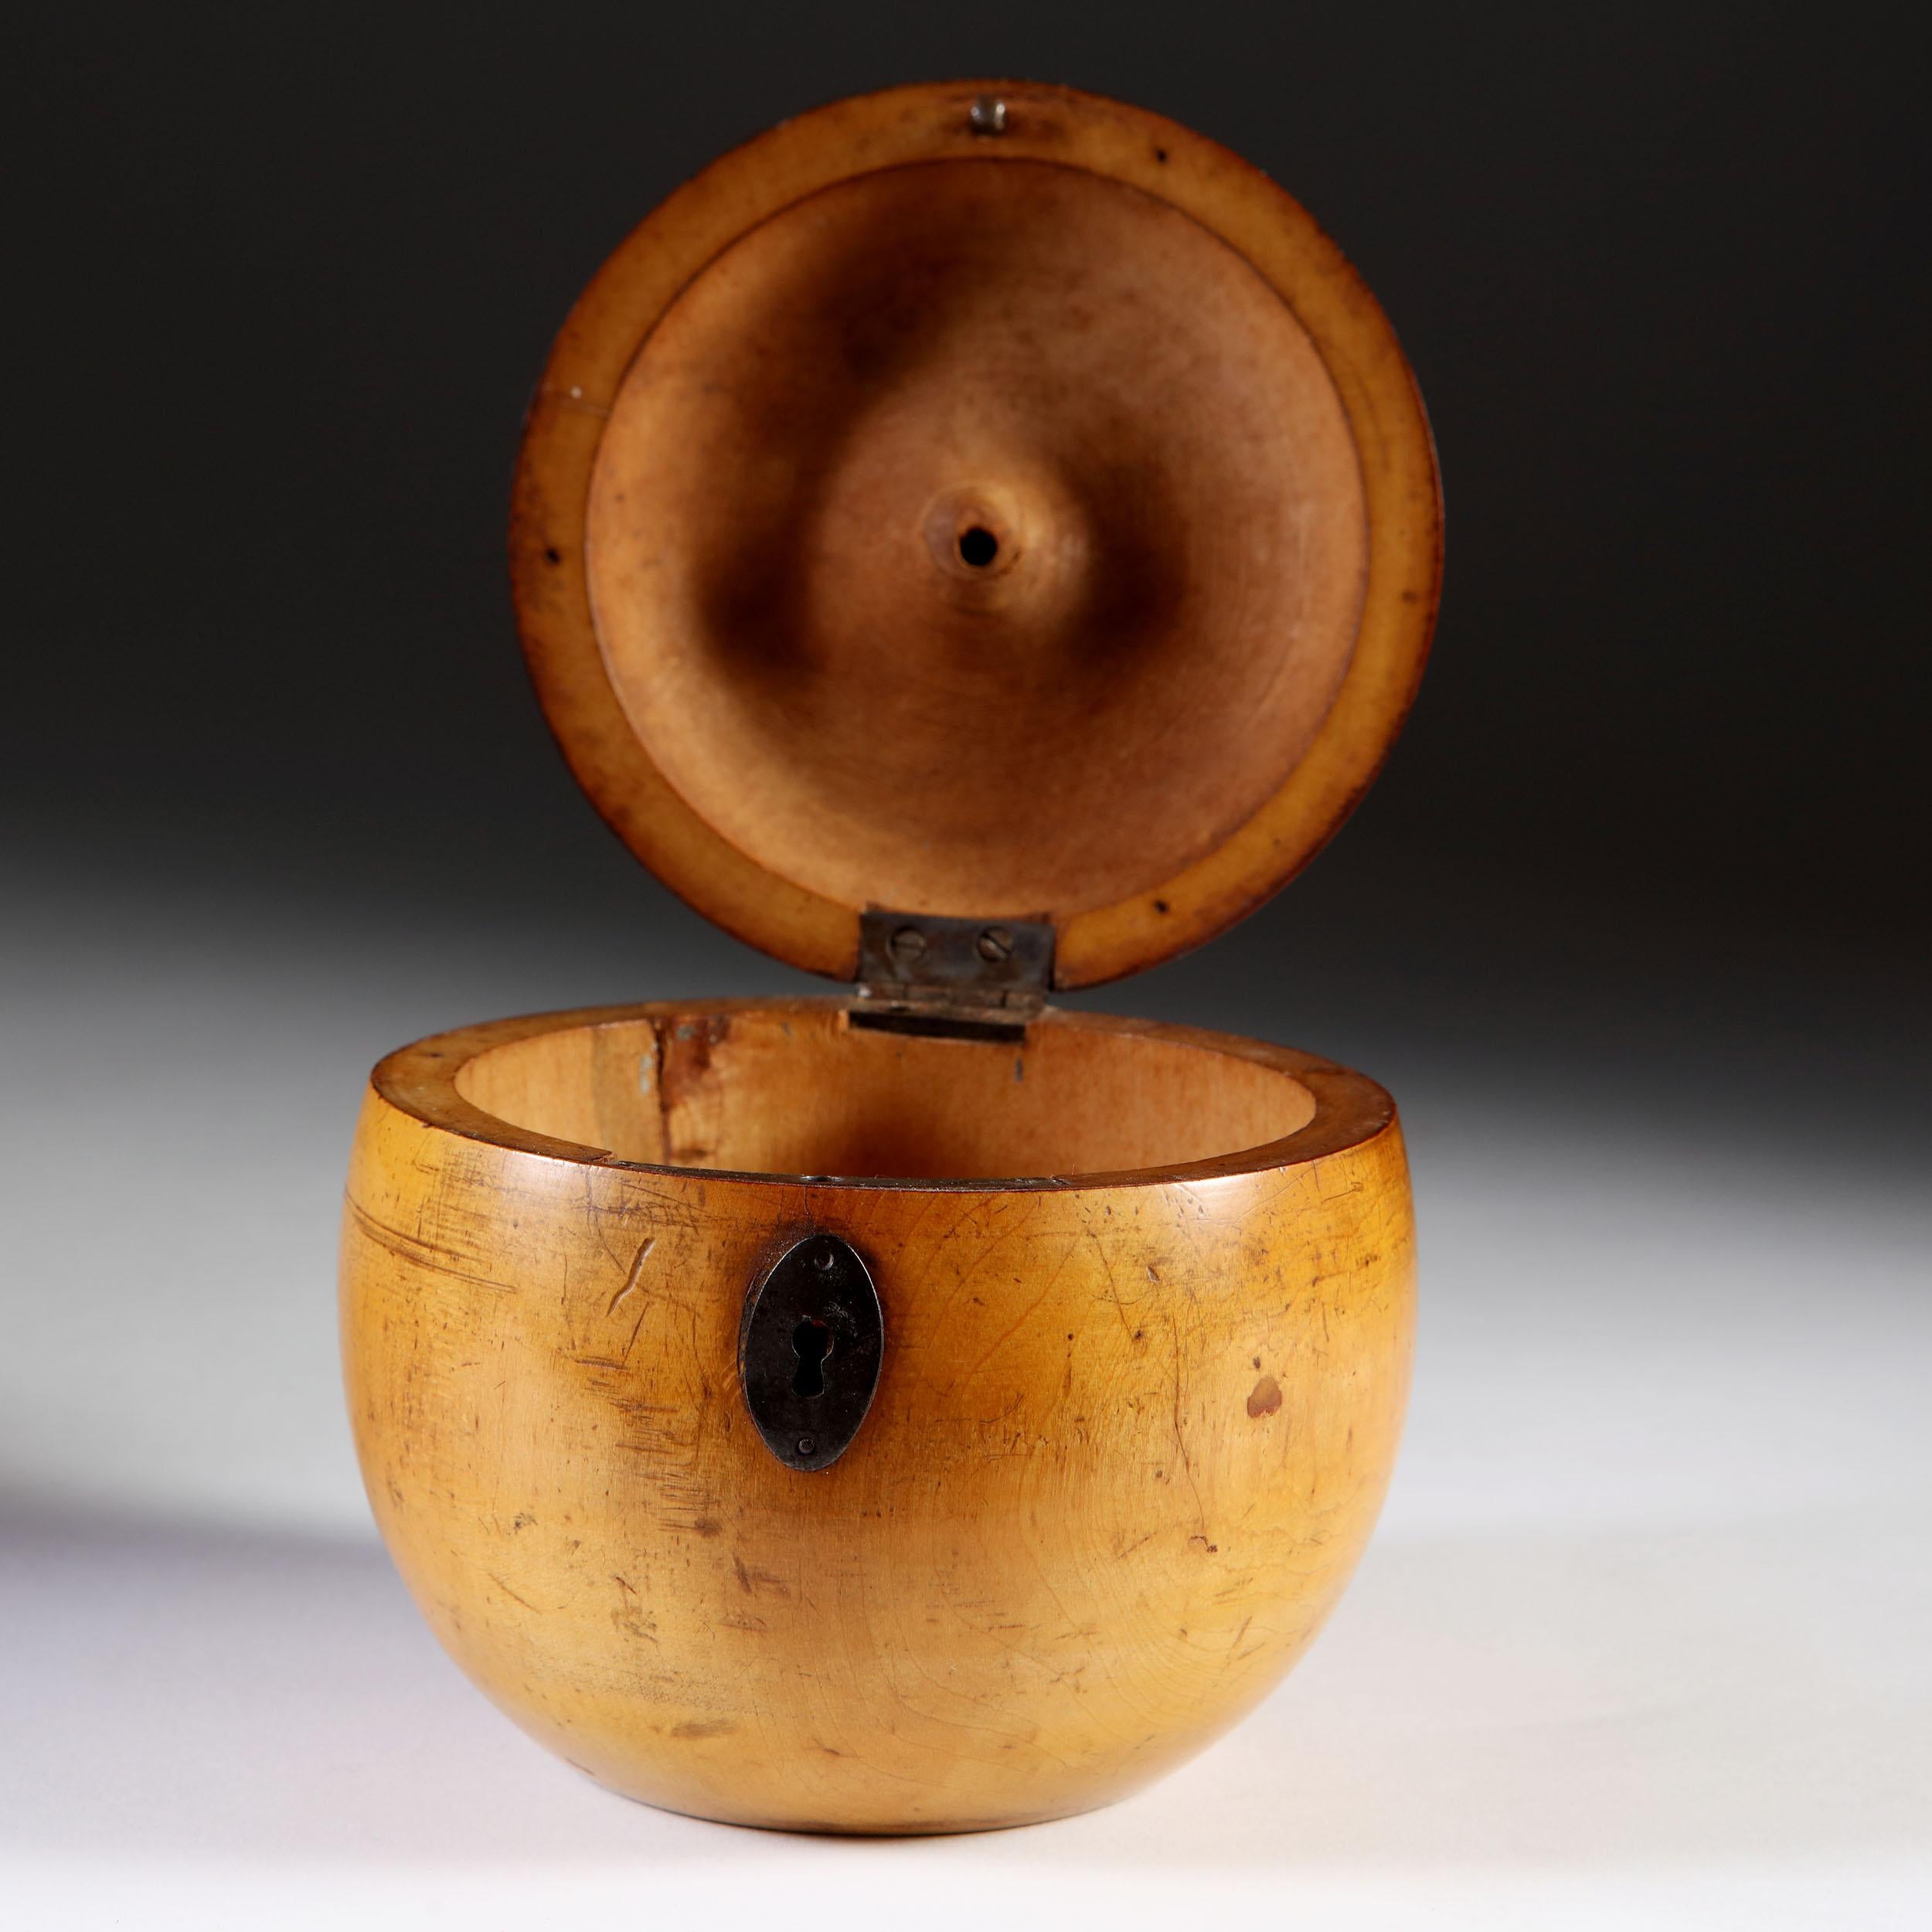 A fine late 18th century novelty fruitwood tea caddy in the form of an apple. Lathe turned and with a soft honey patina, retaining its original stalk and red paper base and remains of the original metal foil lining.
Restoration to the lid at the